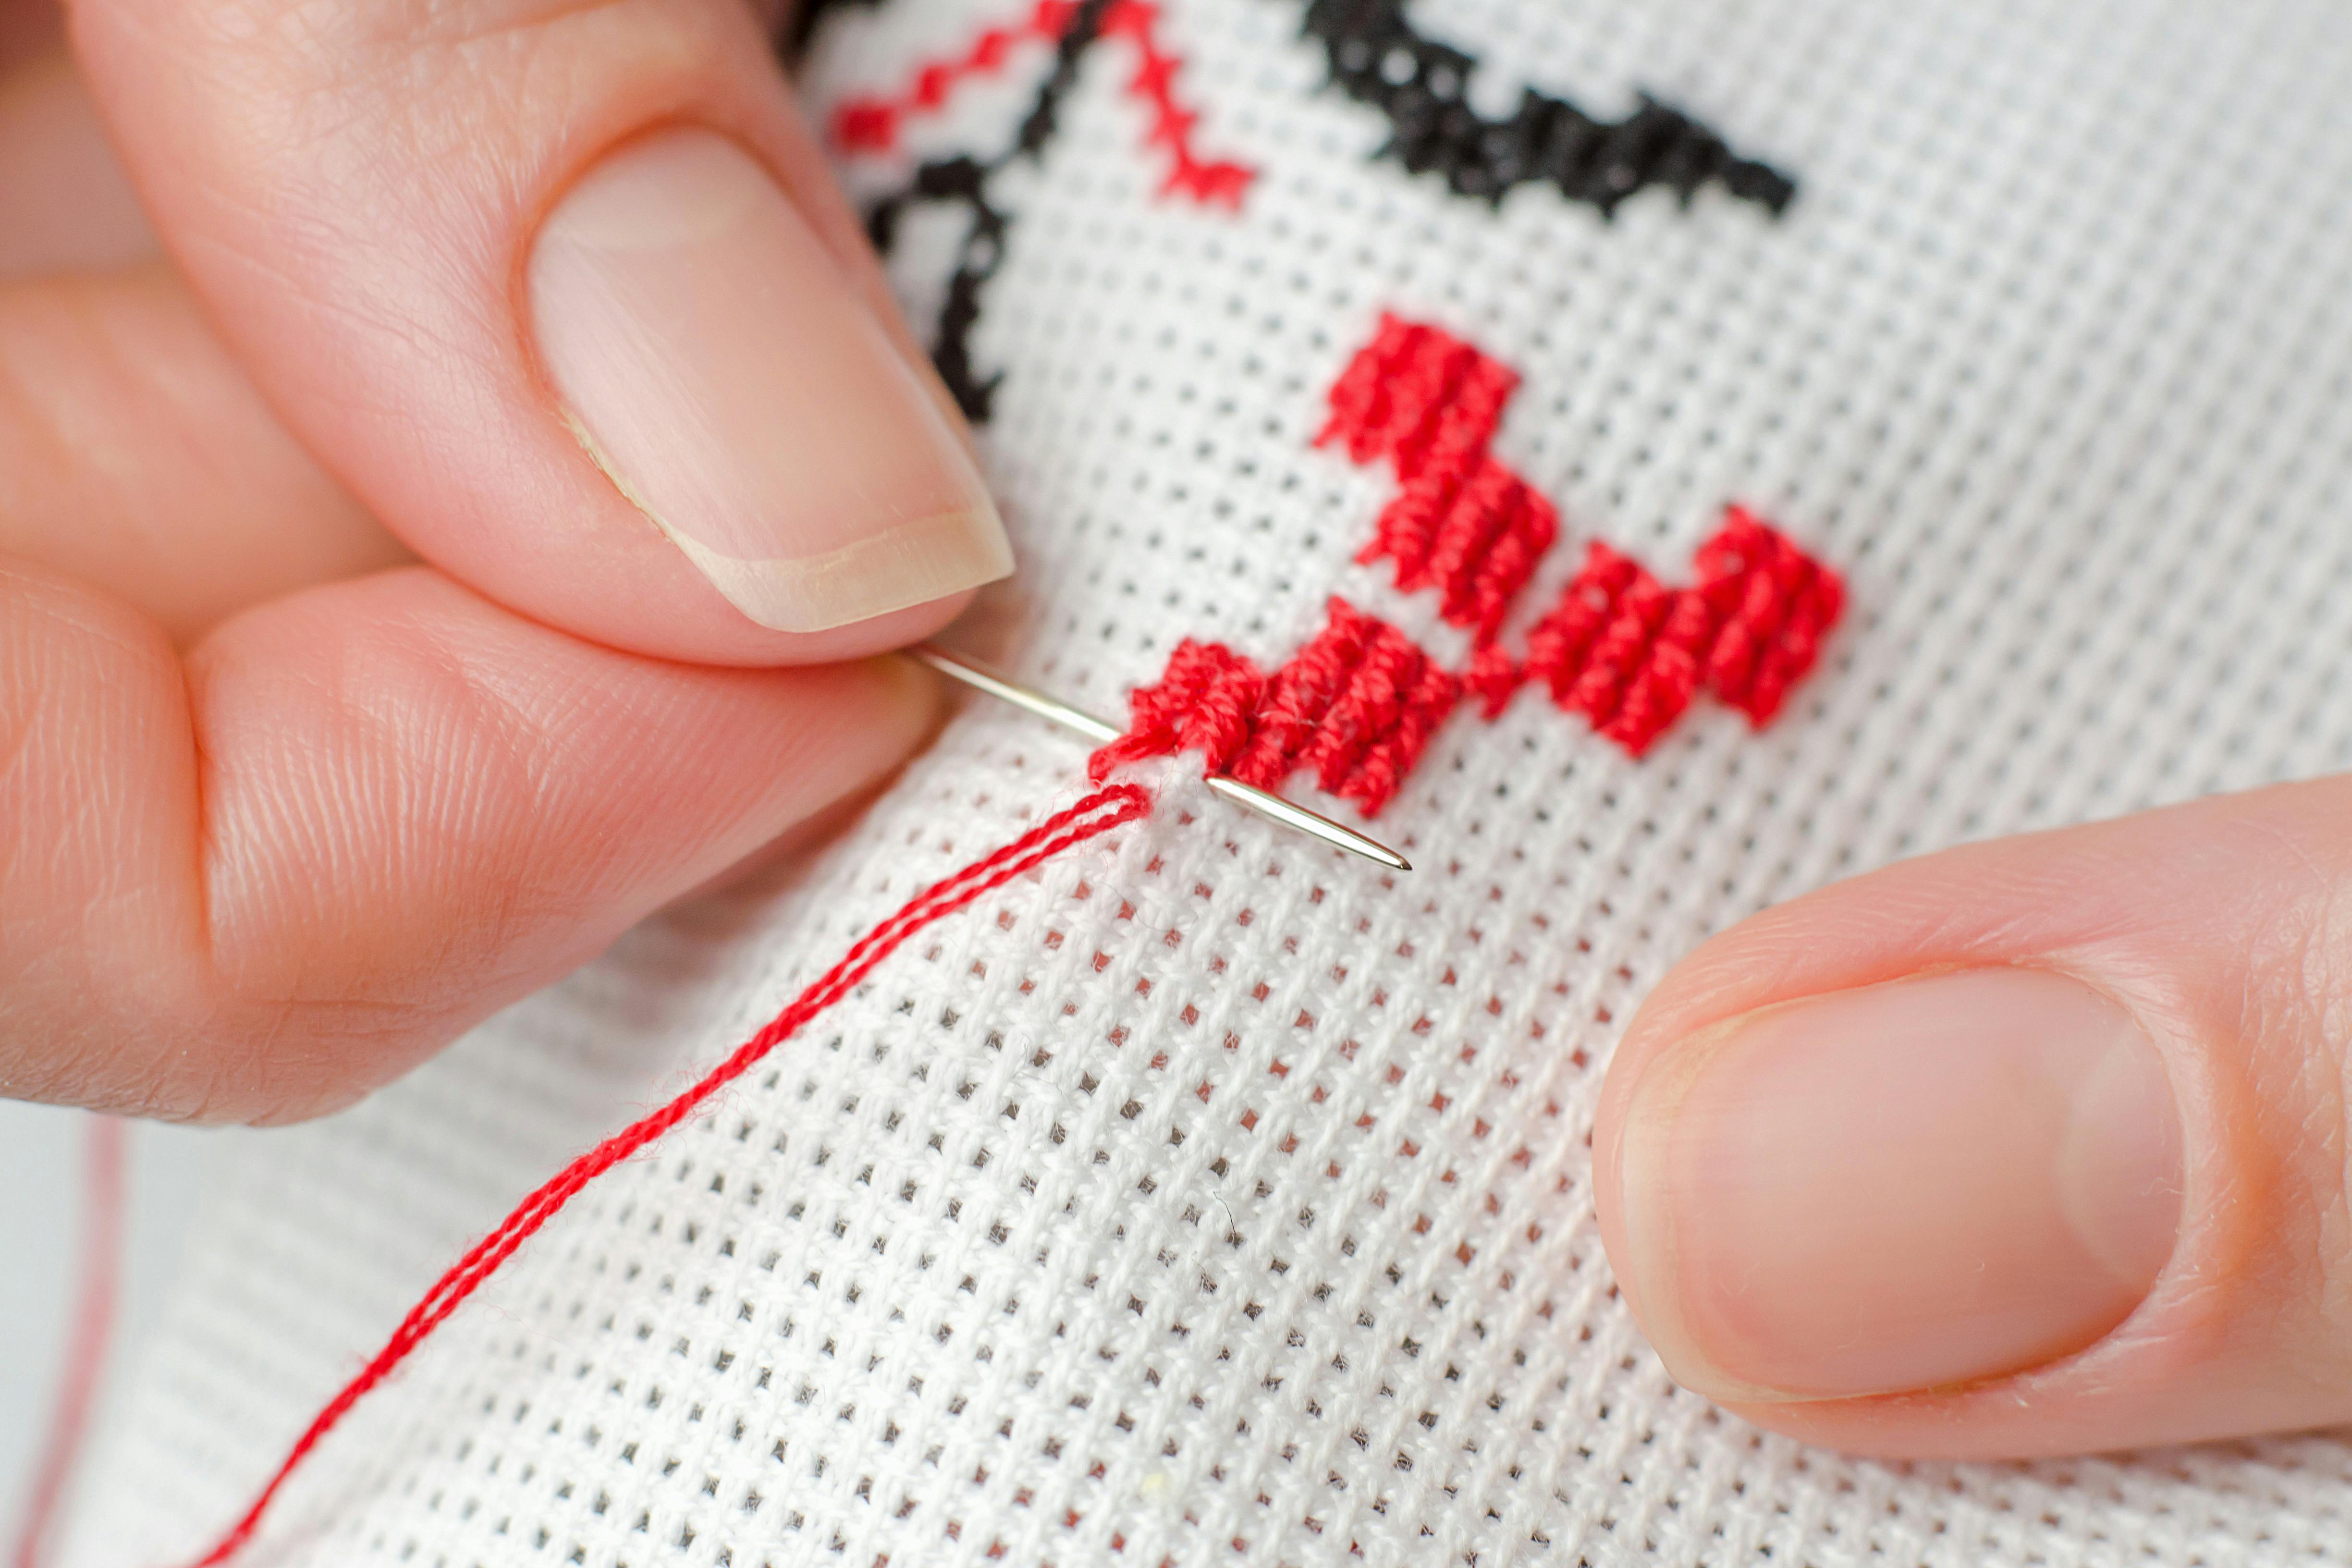  close up of hands embroidering red emblems